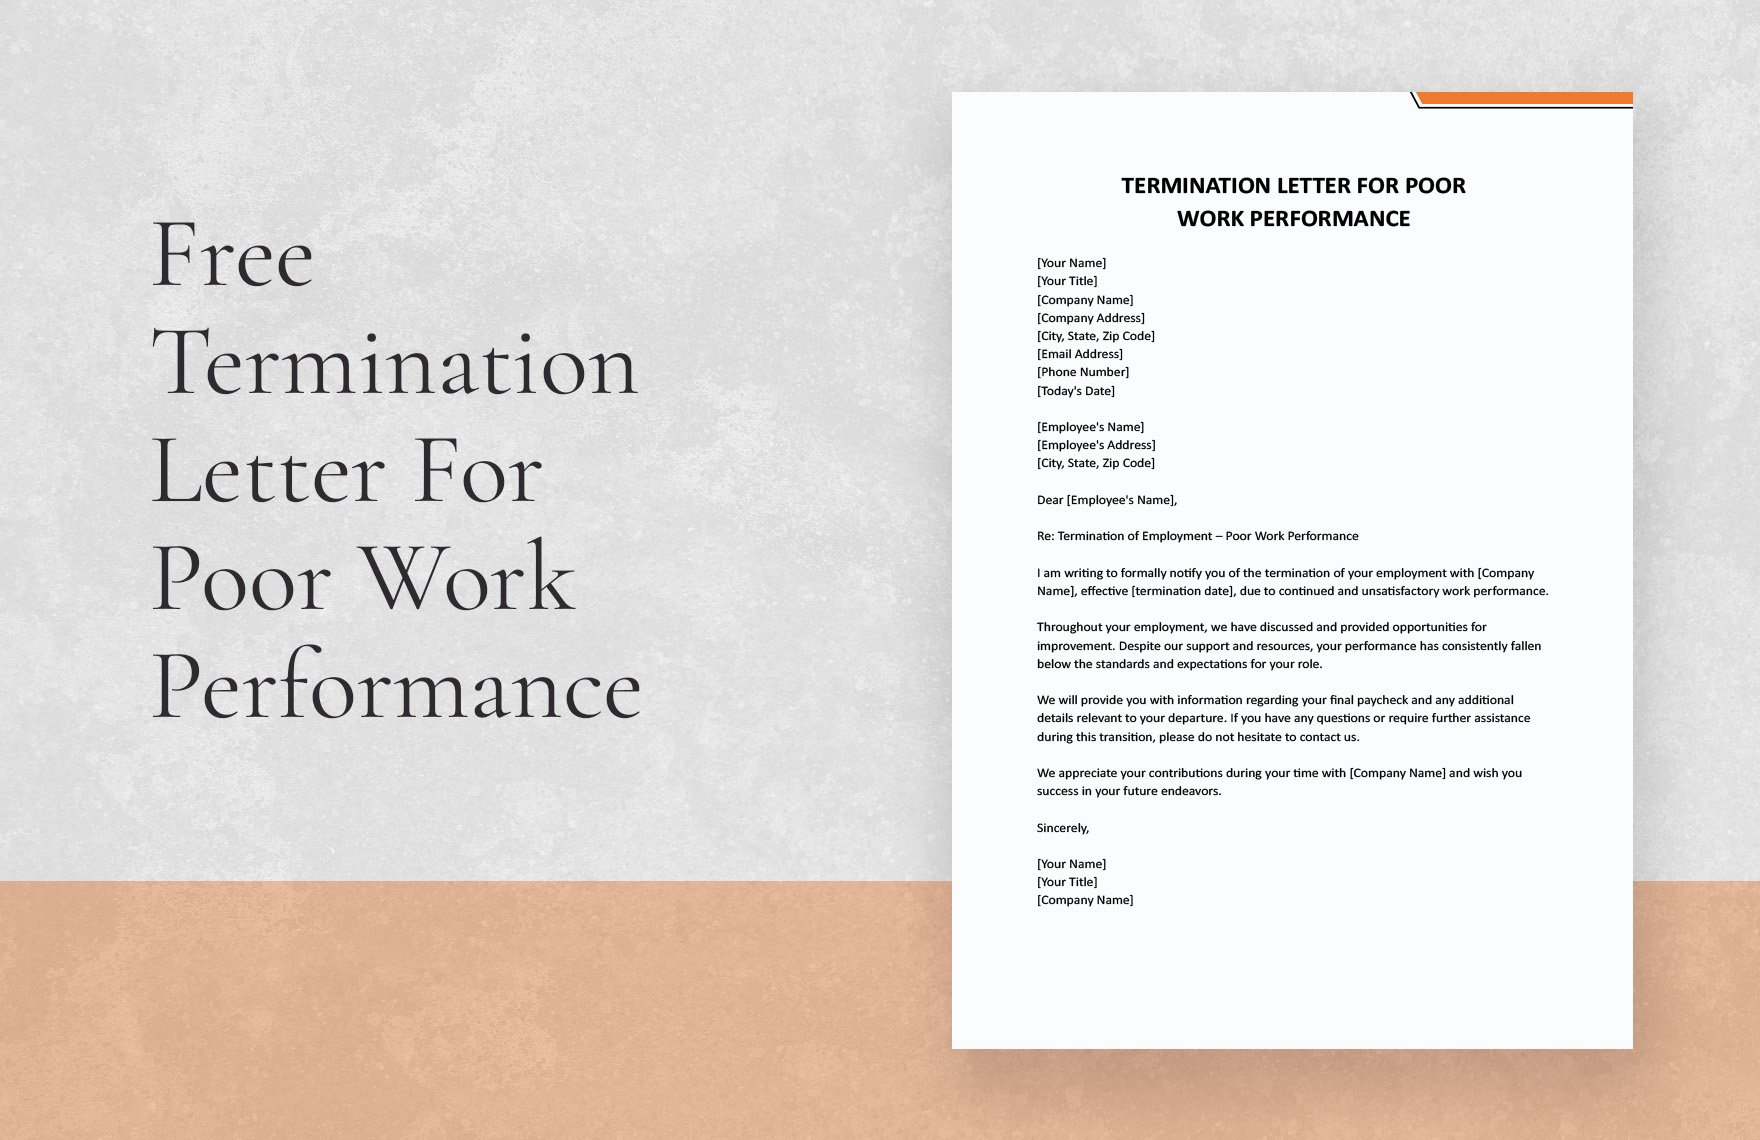 Termination Letter For Poor Work Performance